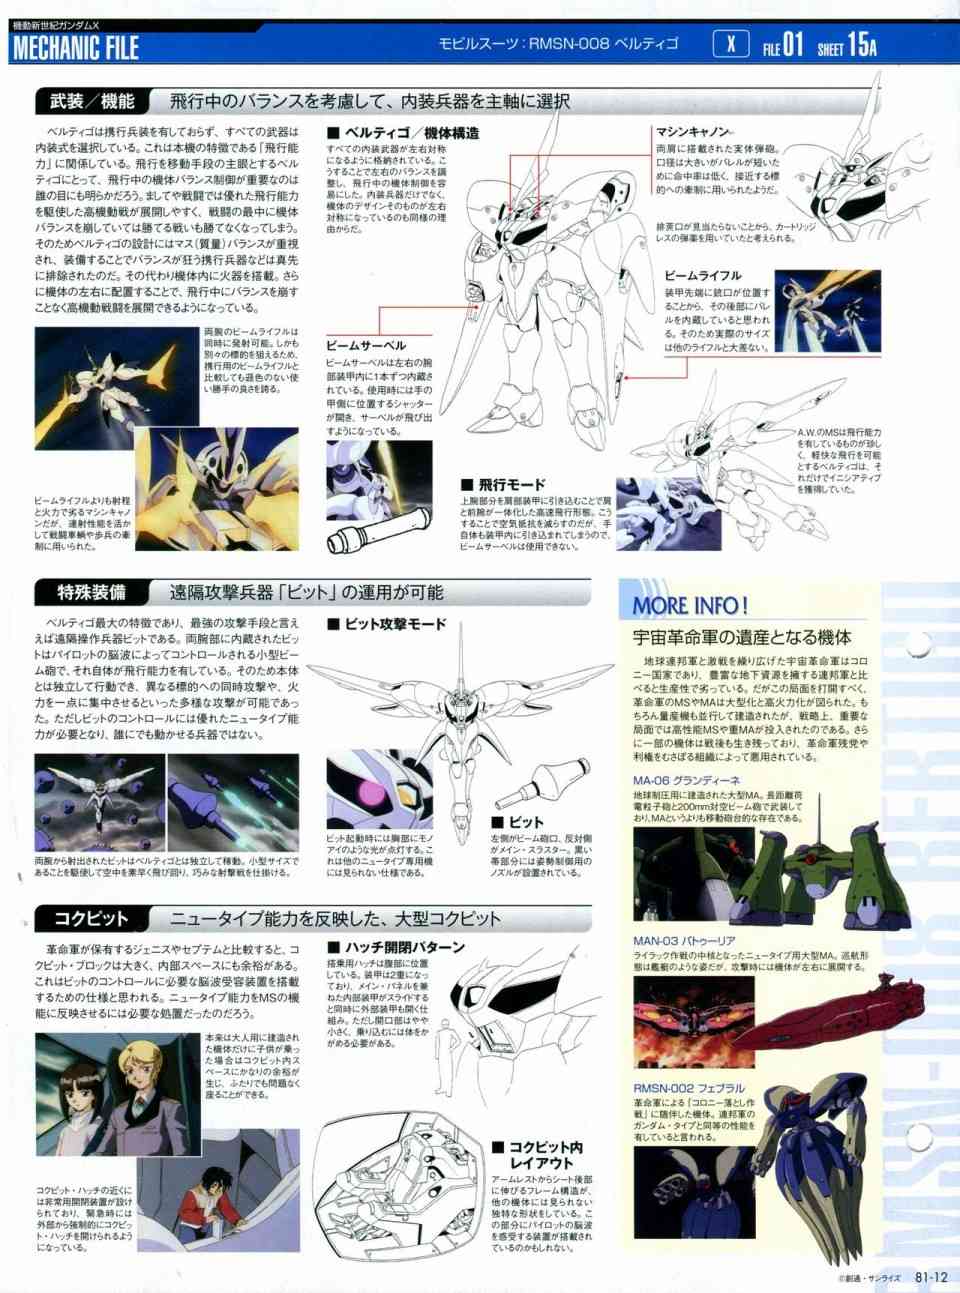 The Official Gundam Perfect File  - 第81-90話(1/7) - 4